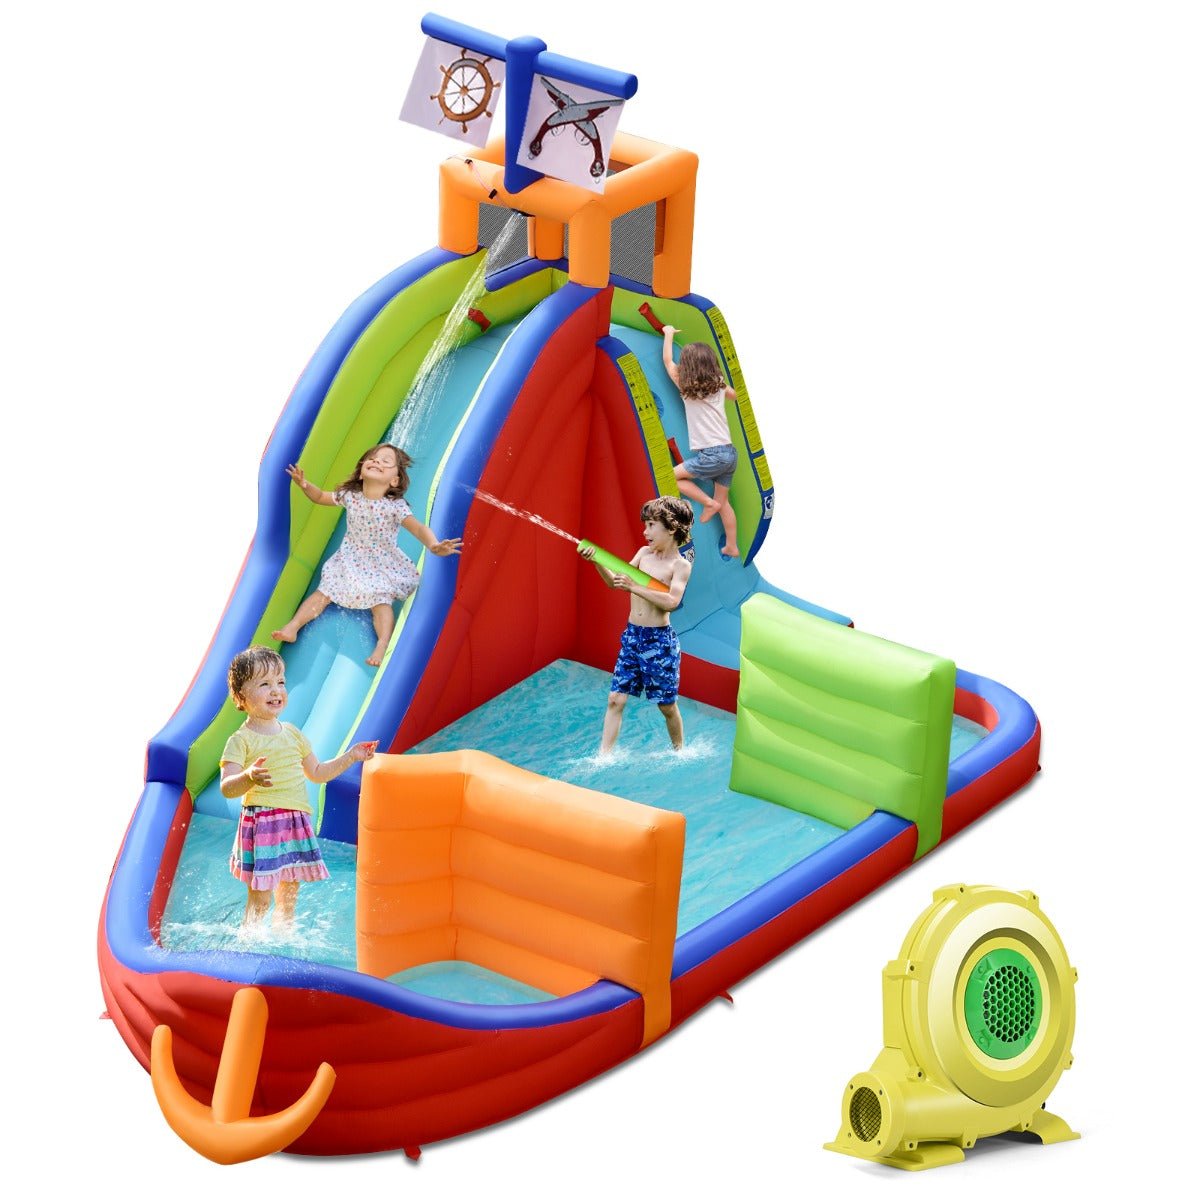 Kid-Friendly Pirate Adventure: 6-in-1 Inflatable Pirate Ship with Slide